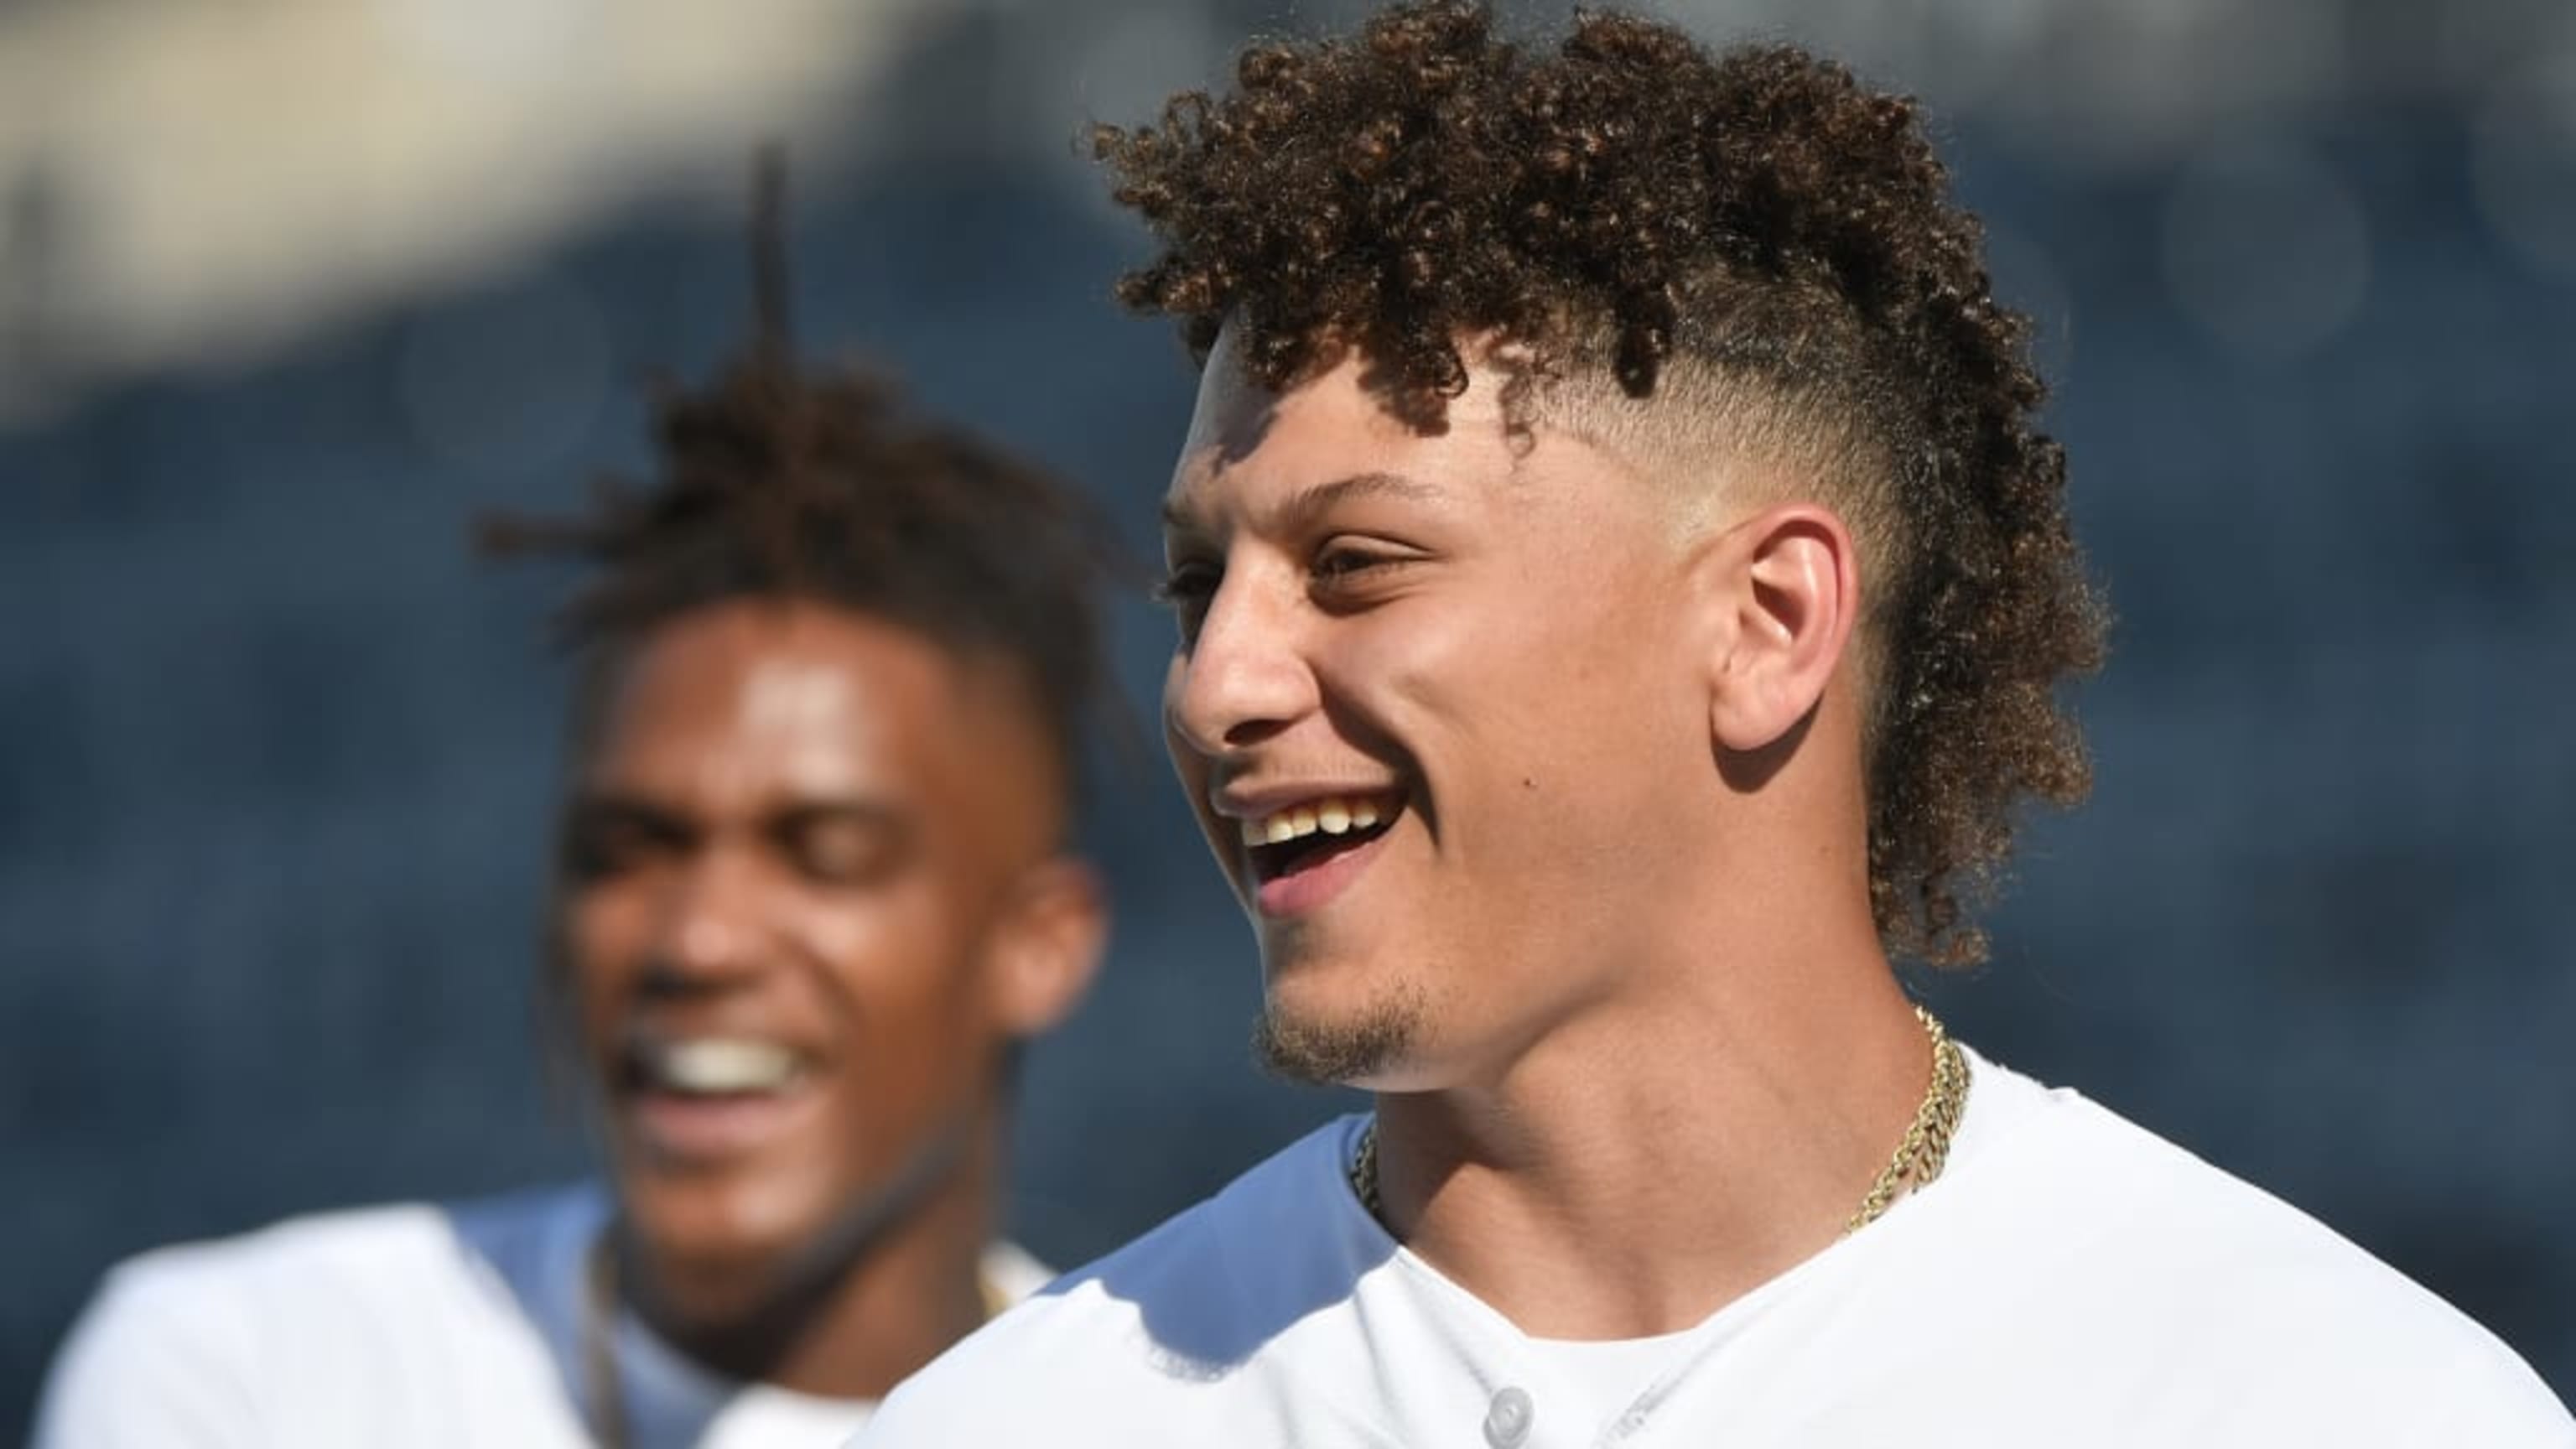 Pat Mahomes thrilled by son's Super Bowl shot